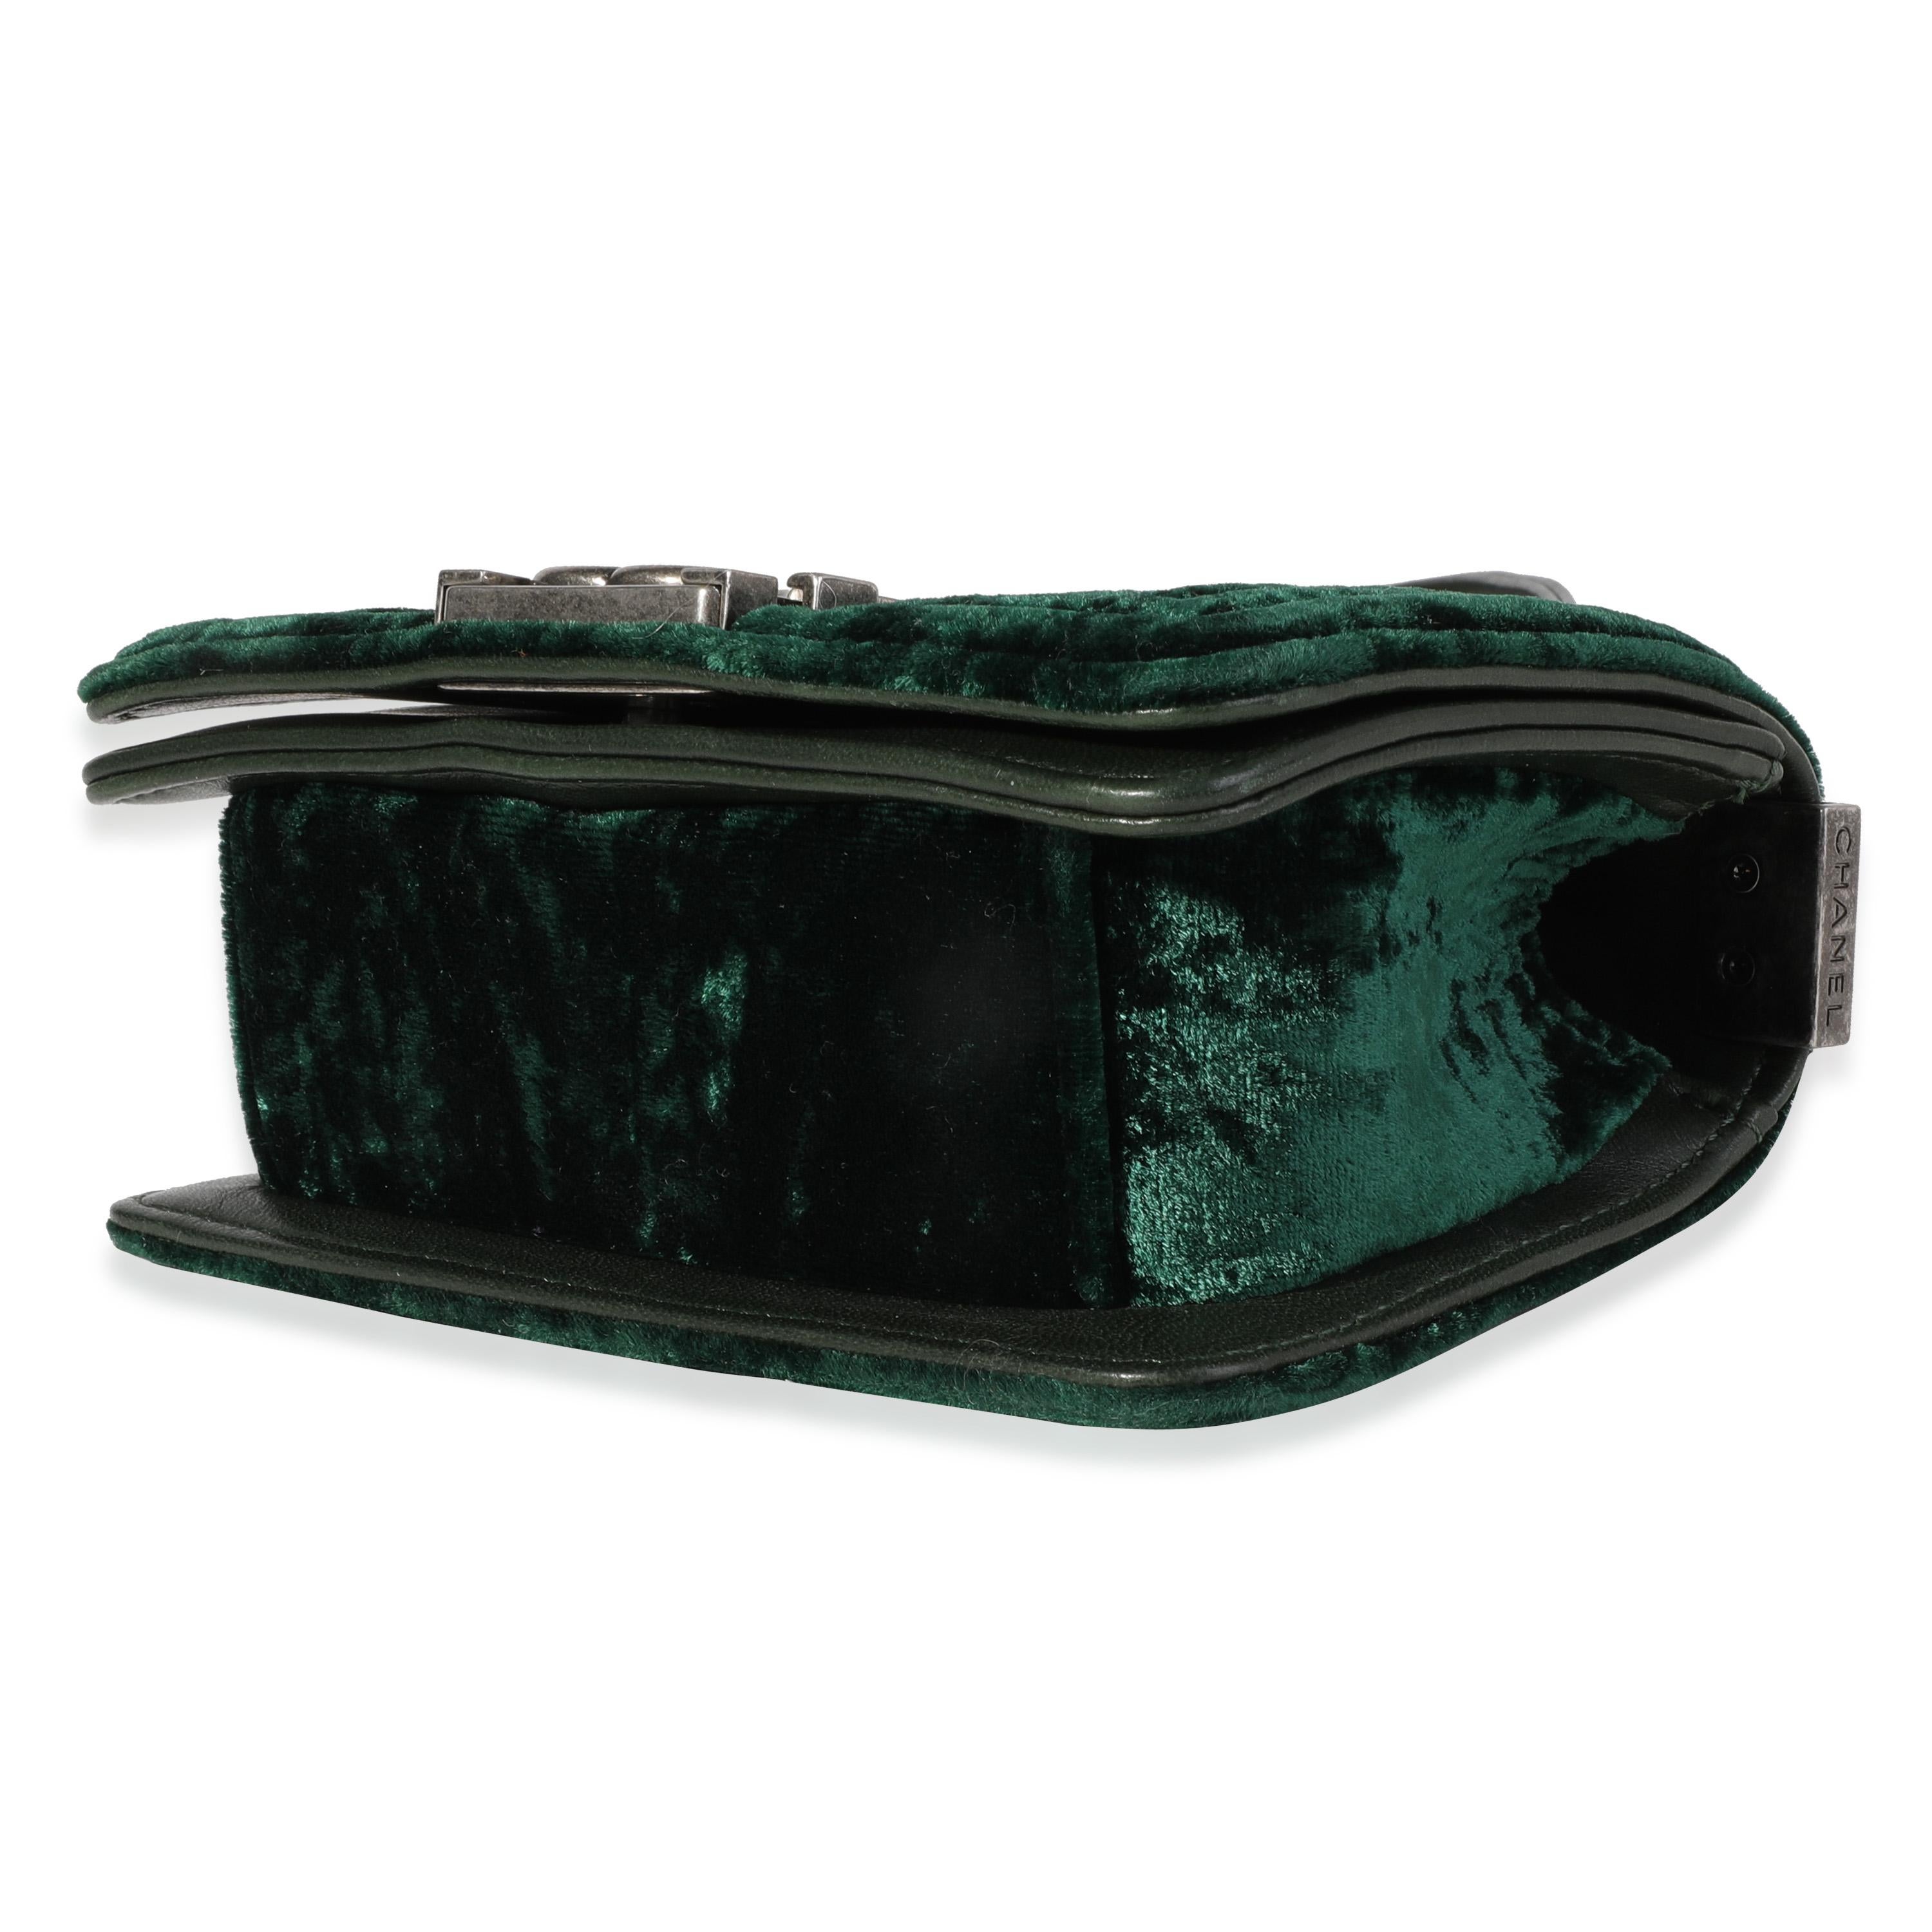 Listing Title: Chanel Pine Green Crushed Velvet Mini Boy Bag
SKU: 118996
Condition: Pre-owned (3000)
Handbag Condition: Excellent
Condition Comments: Scratches on interior.
Brand: Chanel
Model: Boy
Origin Country: Italy
Handbag Silhouette: Crossbody